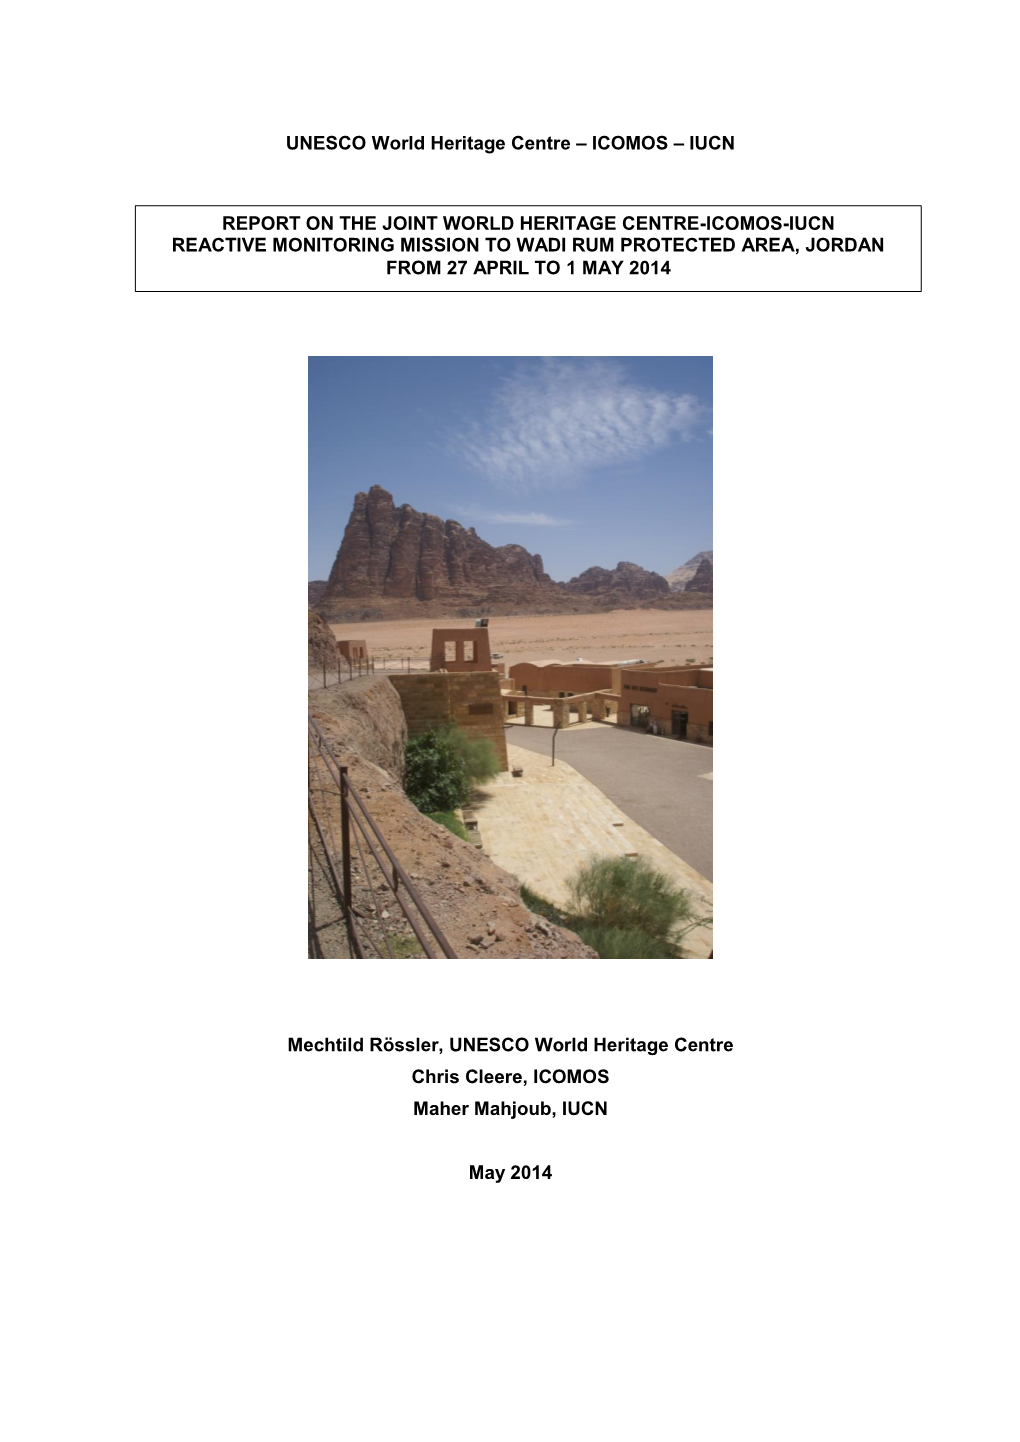 Report on the Joint World Heritage Centre-Icomos-Iucn Reactive Monitoring Mission to Wadi Rum Protected Area, Jordan from 27 April to 1 May 2014